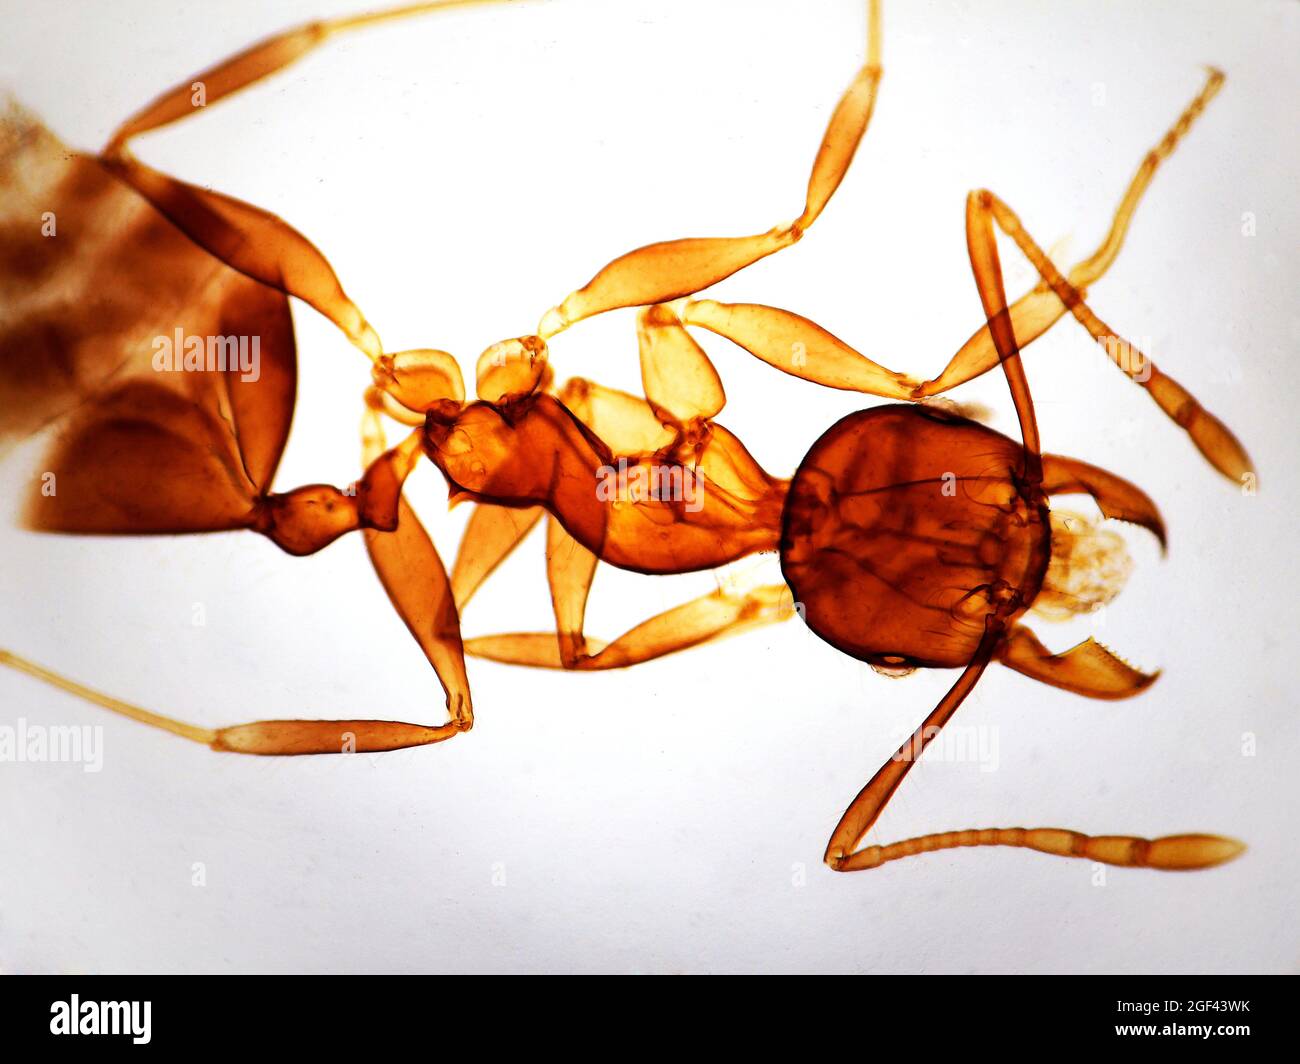 Ant. Photomicrography. Stock Photo